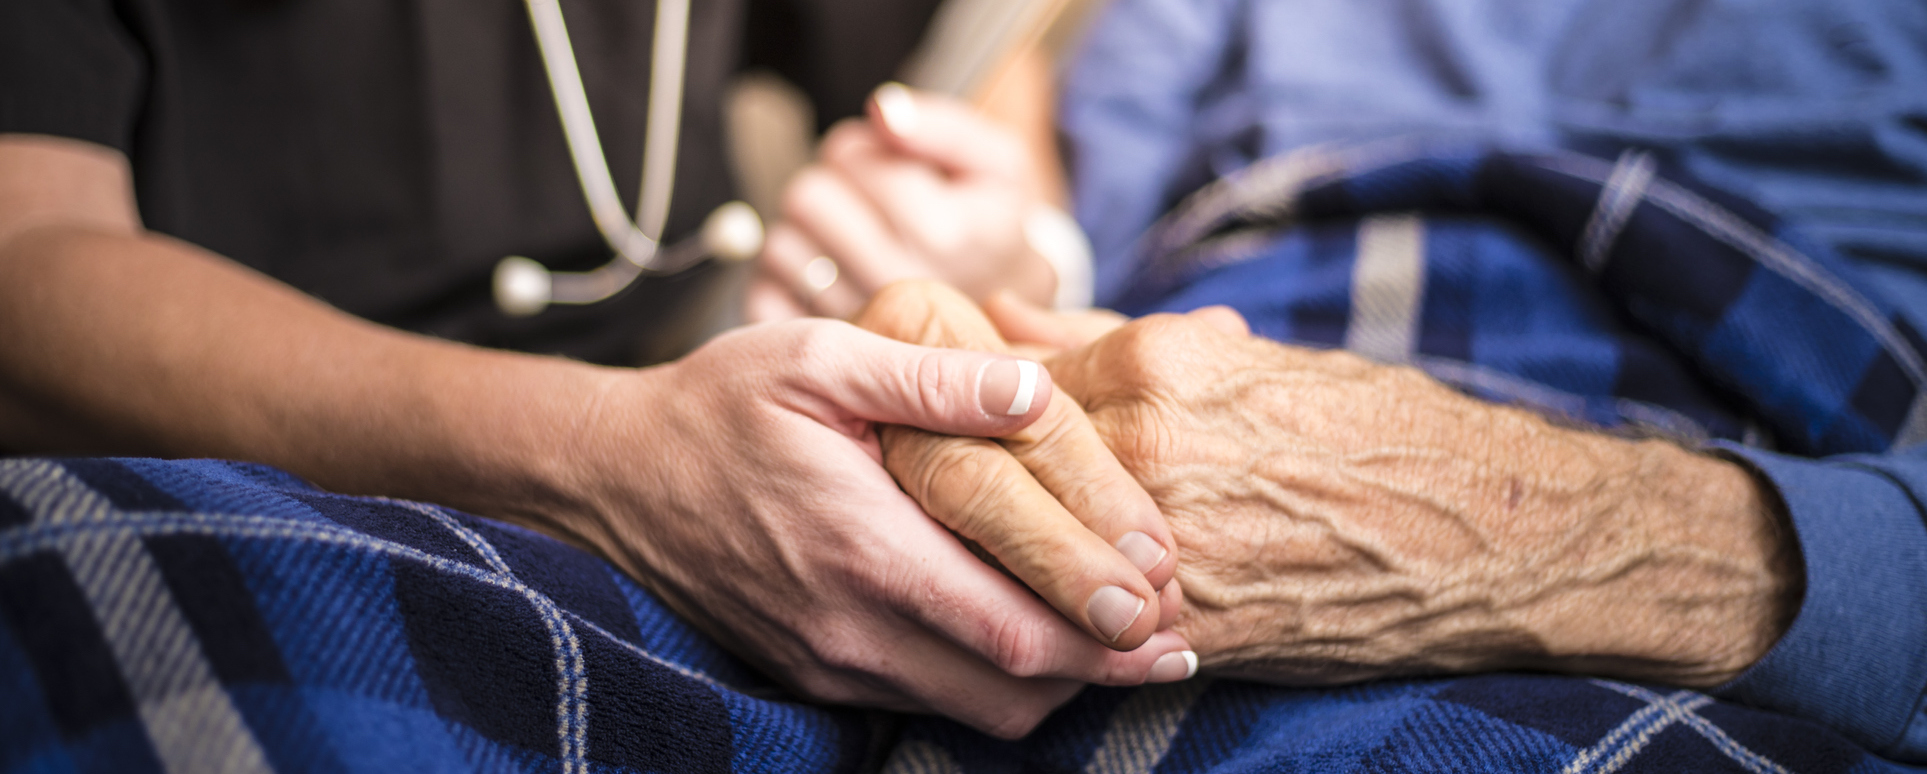 Hospice Nurse visiting an elderly male patient holding their hand